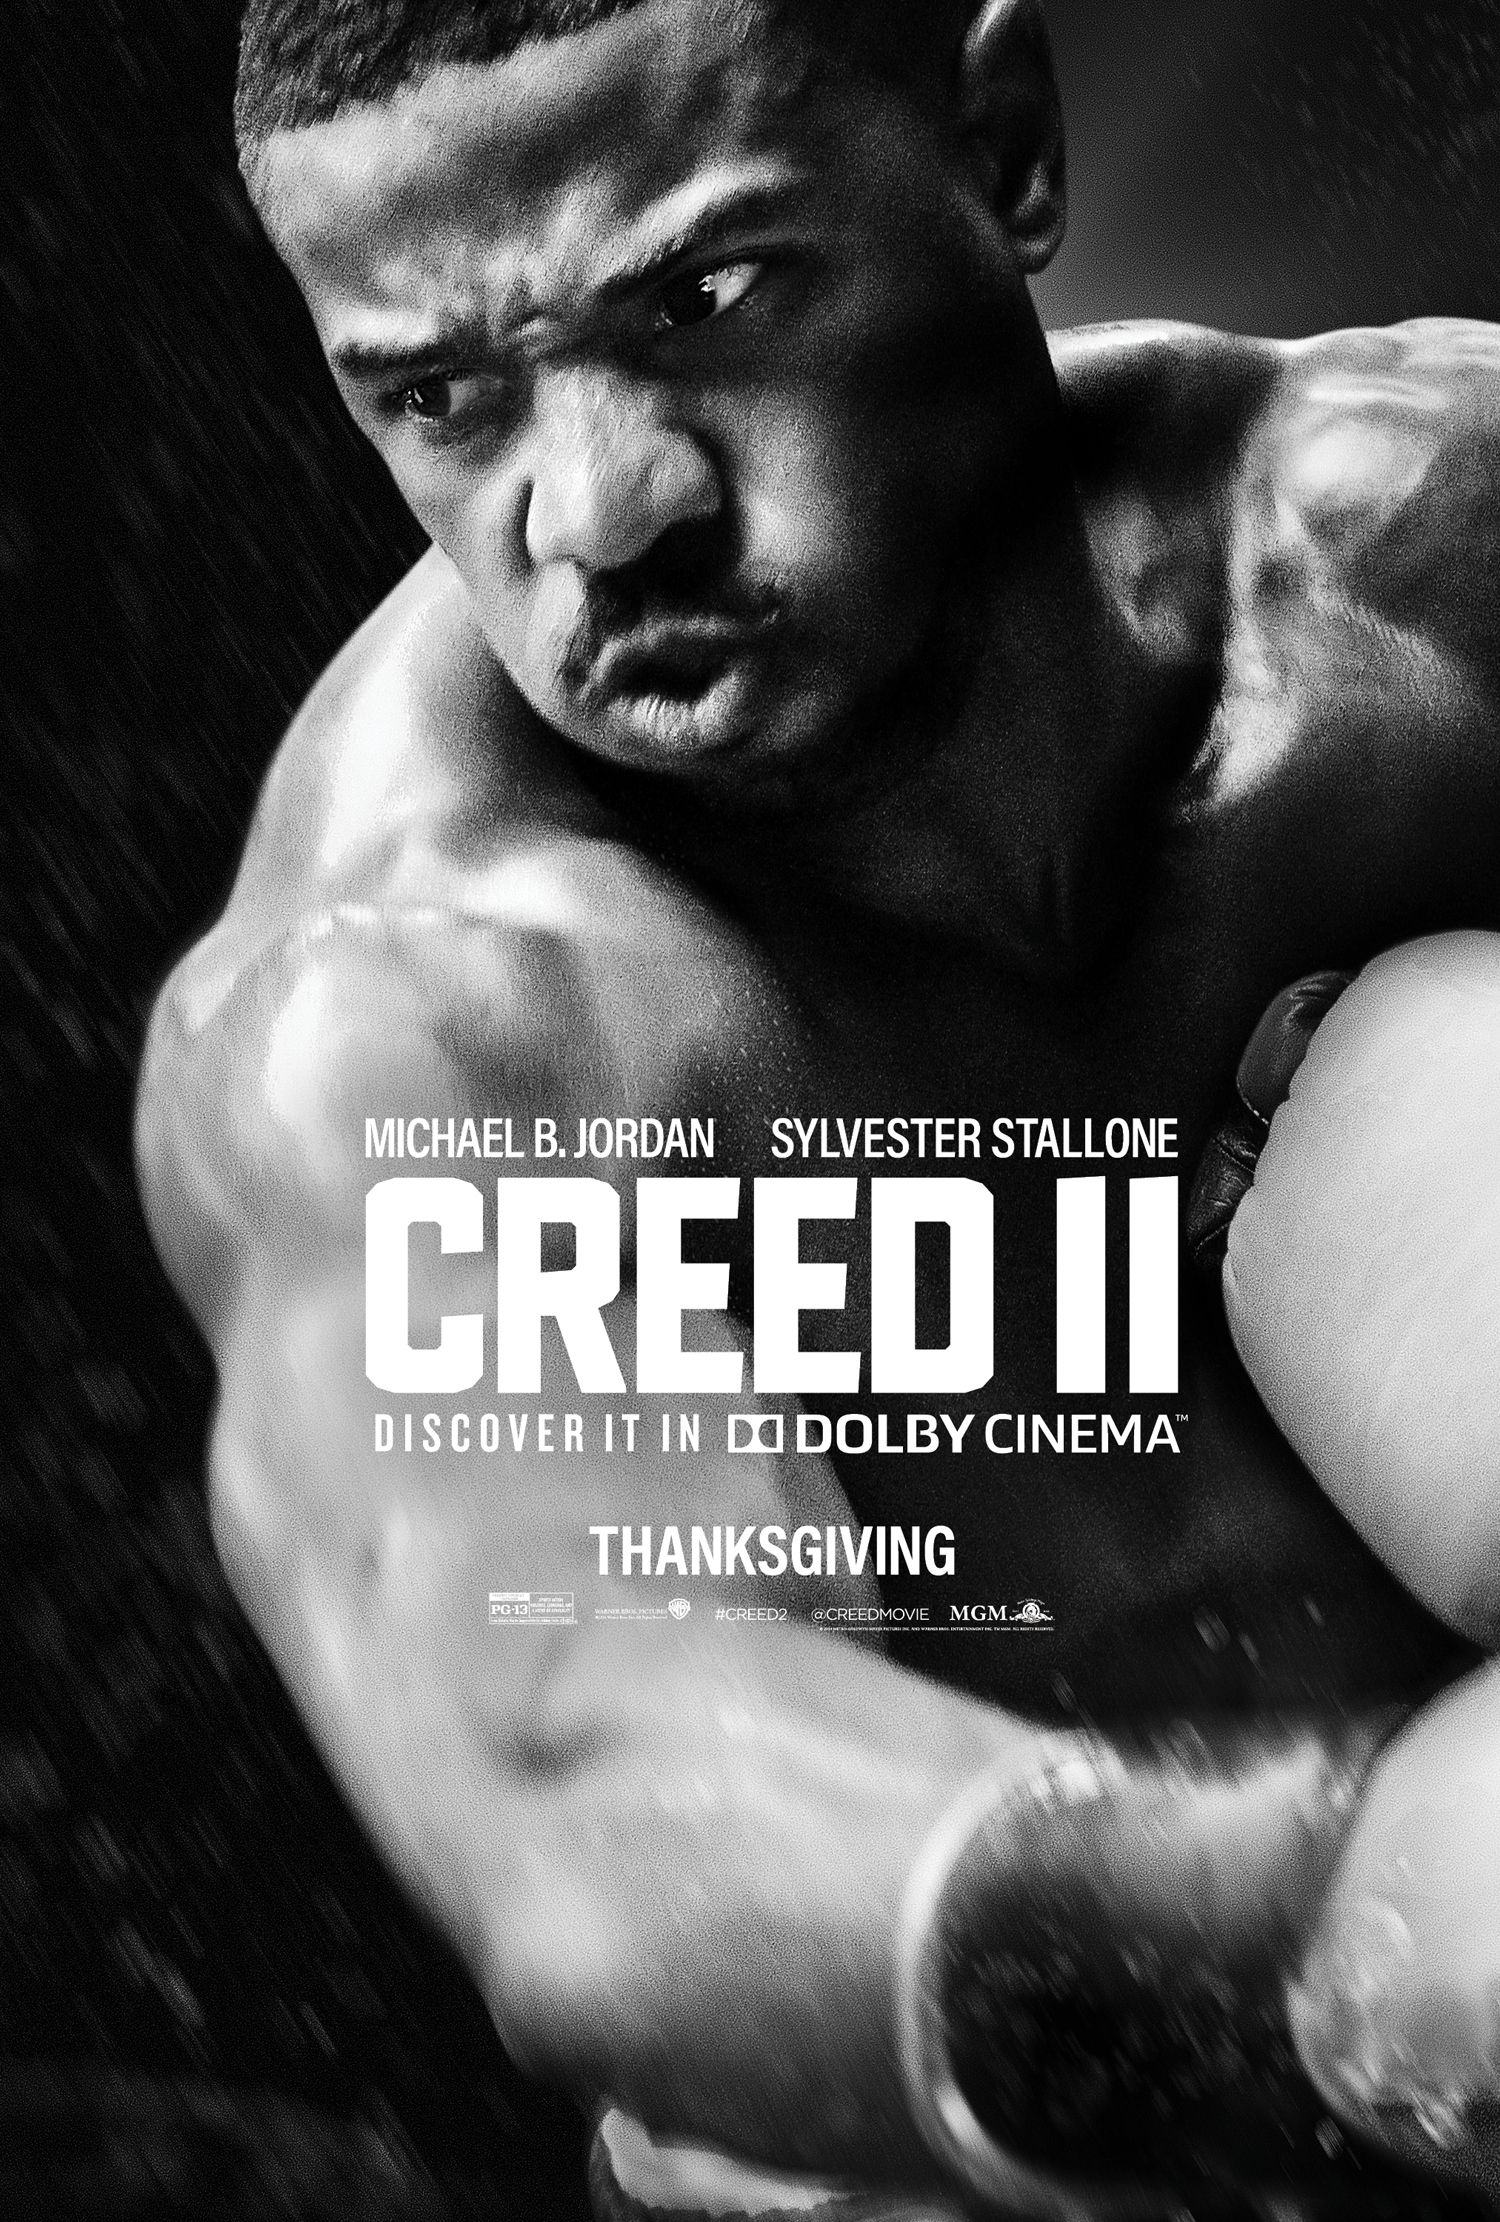 Creed poster - Creed 2 cartel